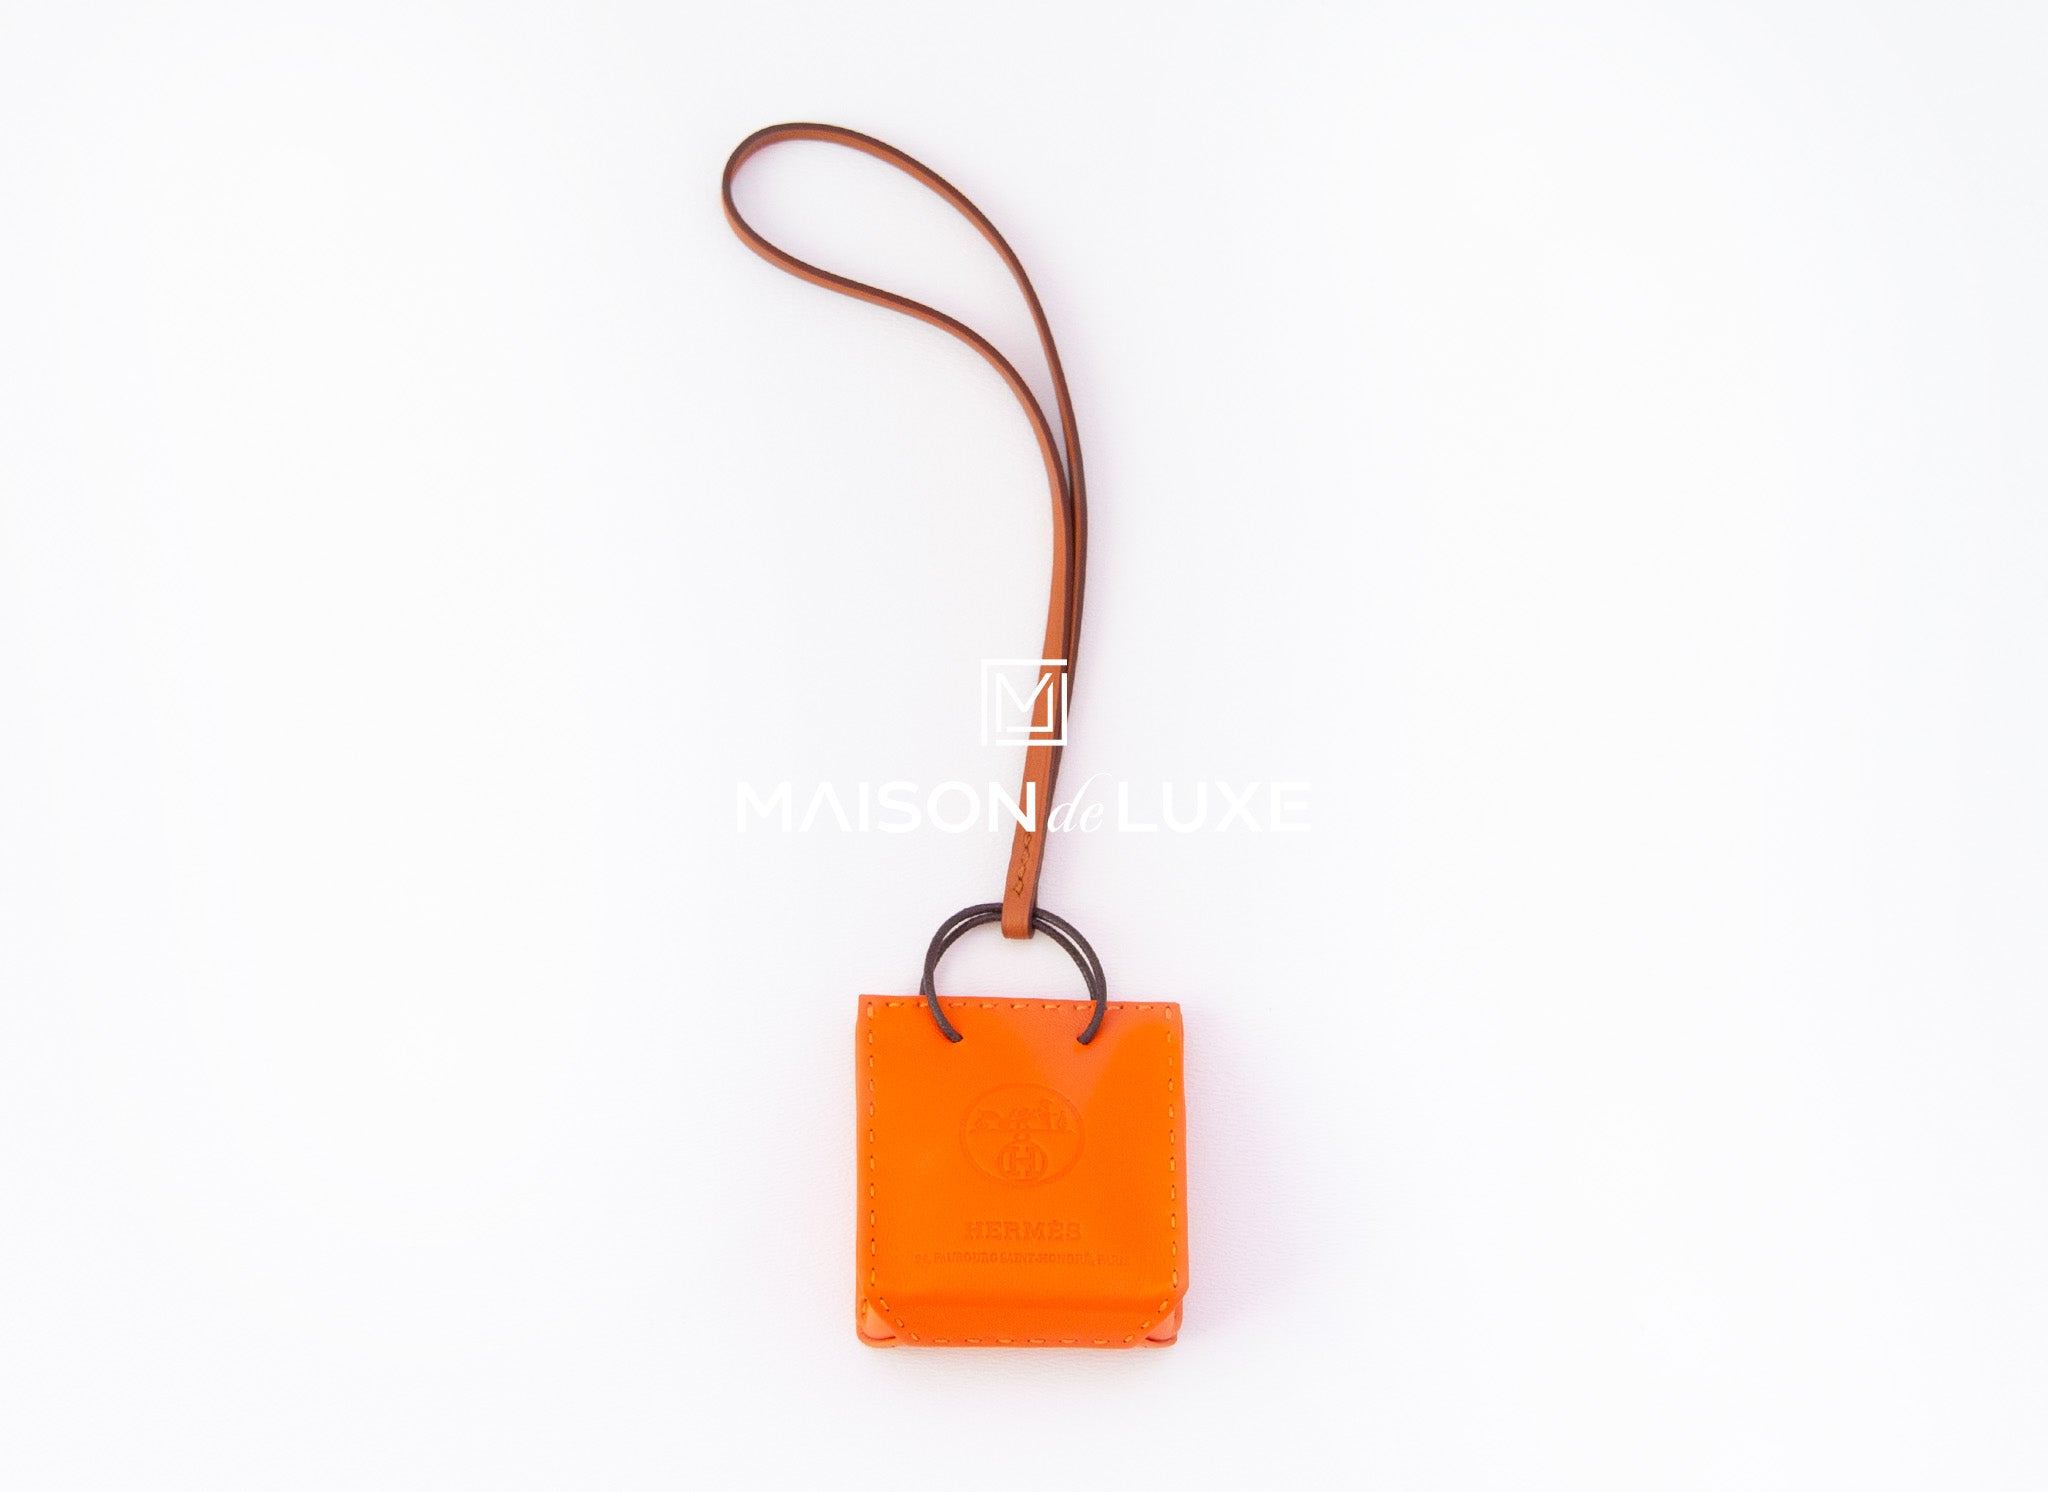 Brand New Hermes Orange Sac Bag Charm - 100% Authentic With Box + All  Packaging